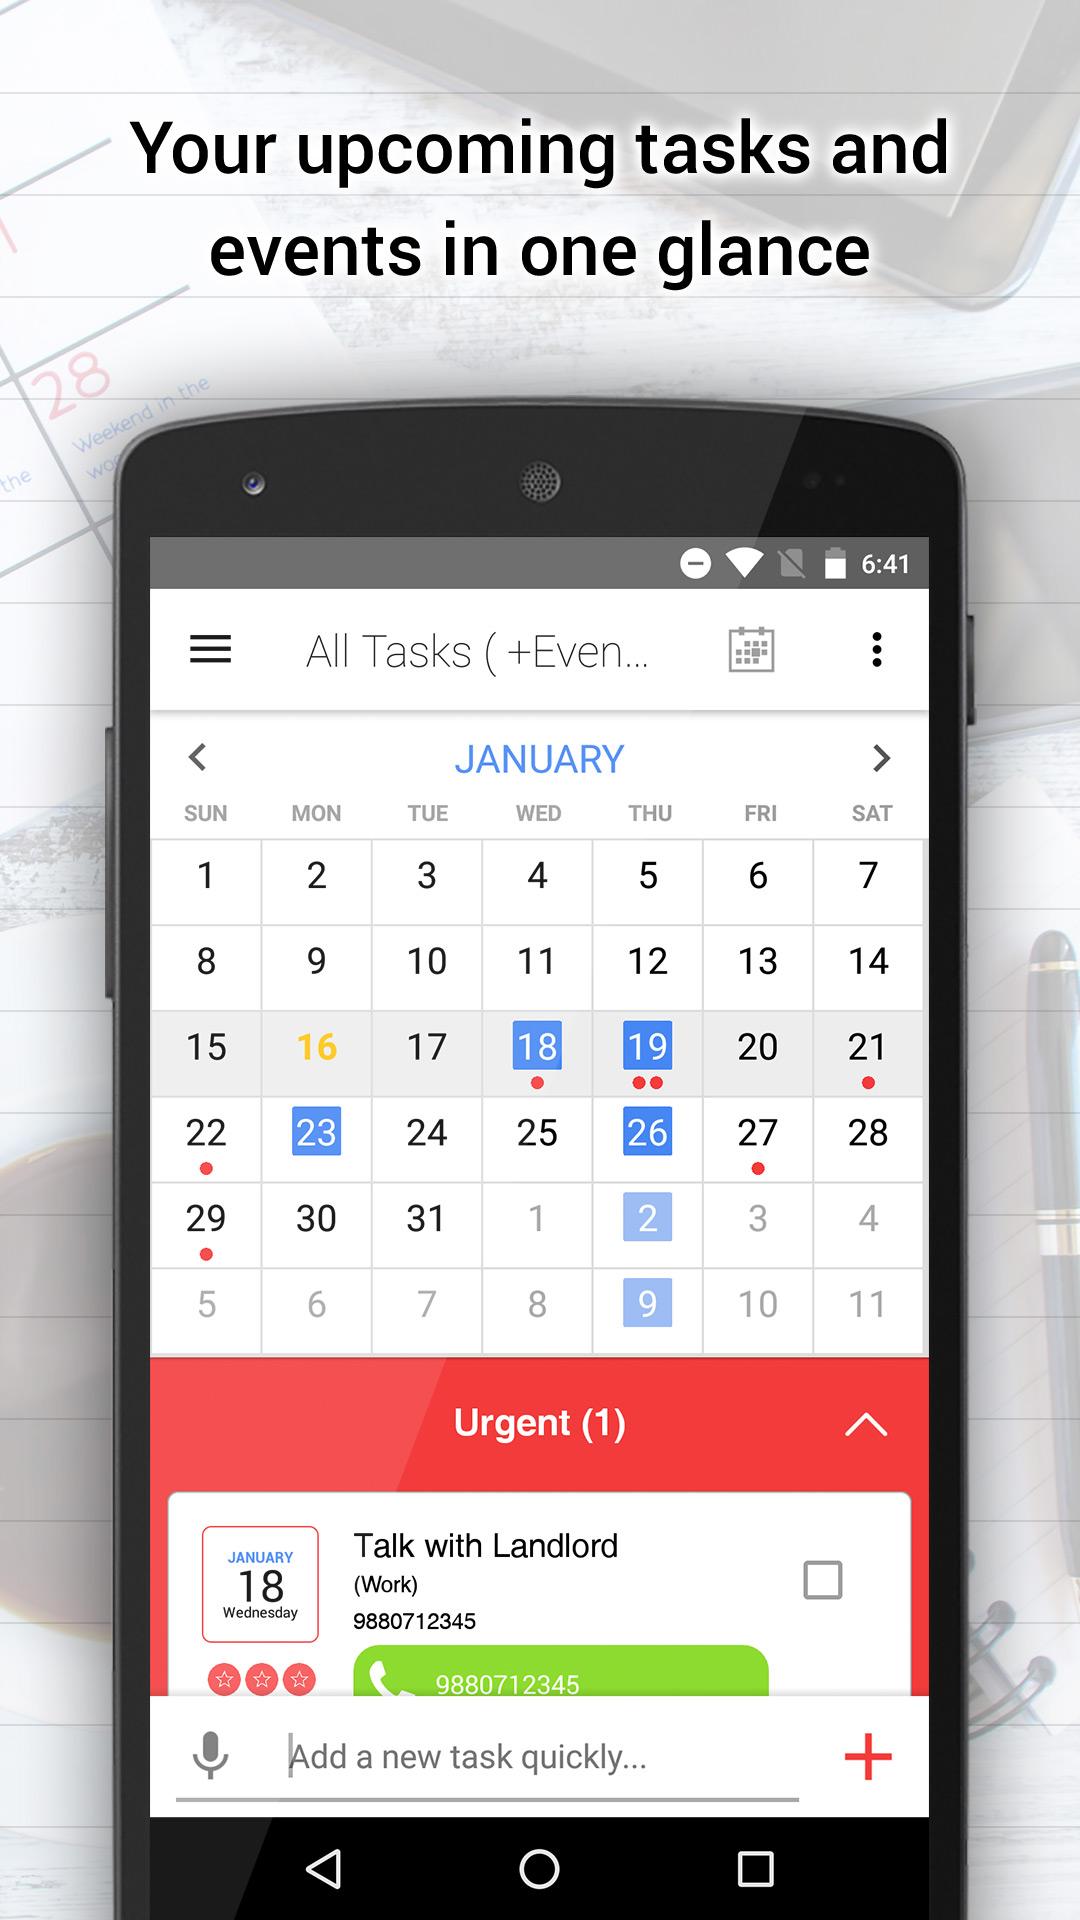 Android application Tasks IQ - To Do List Manager screenshort